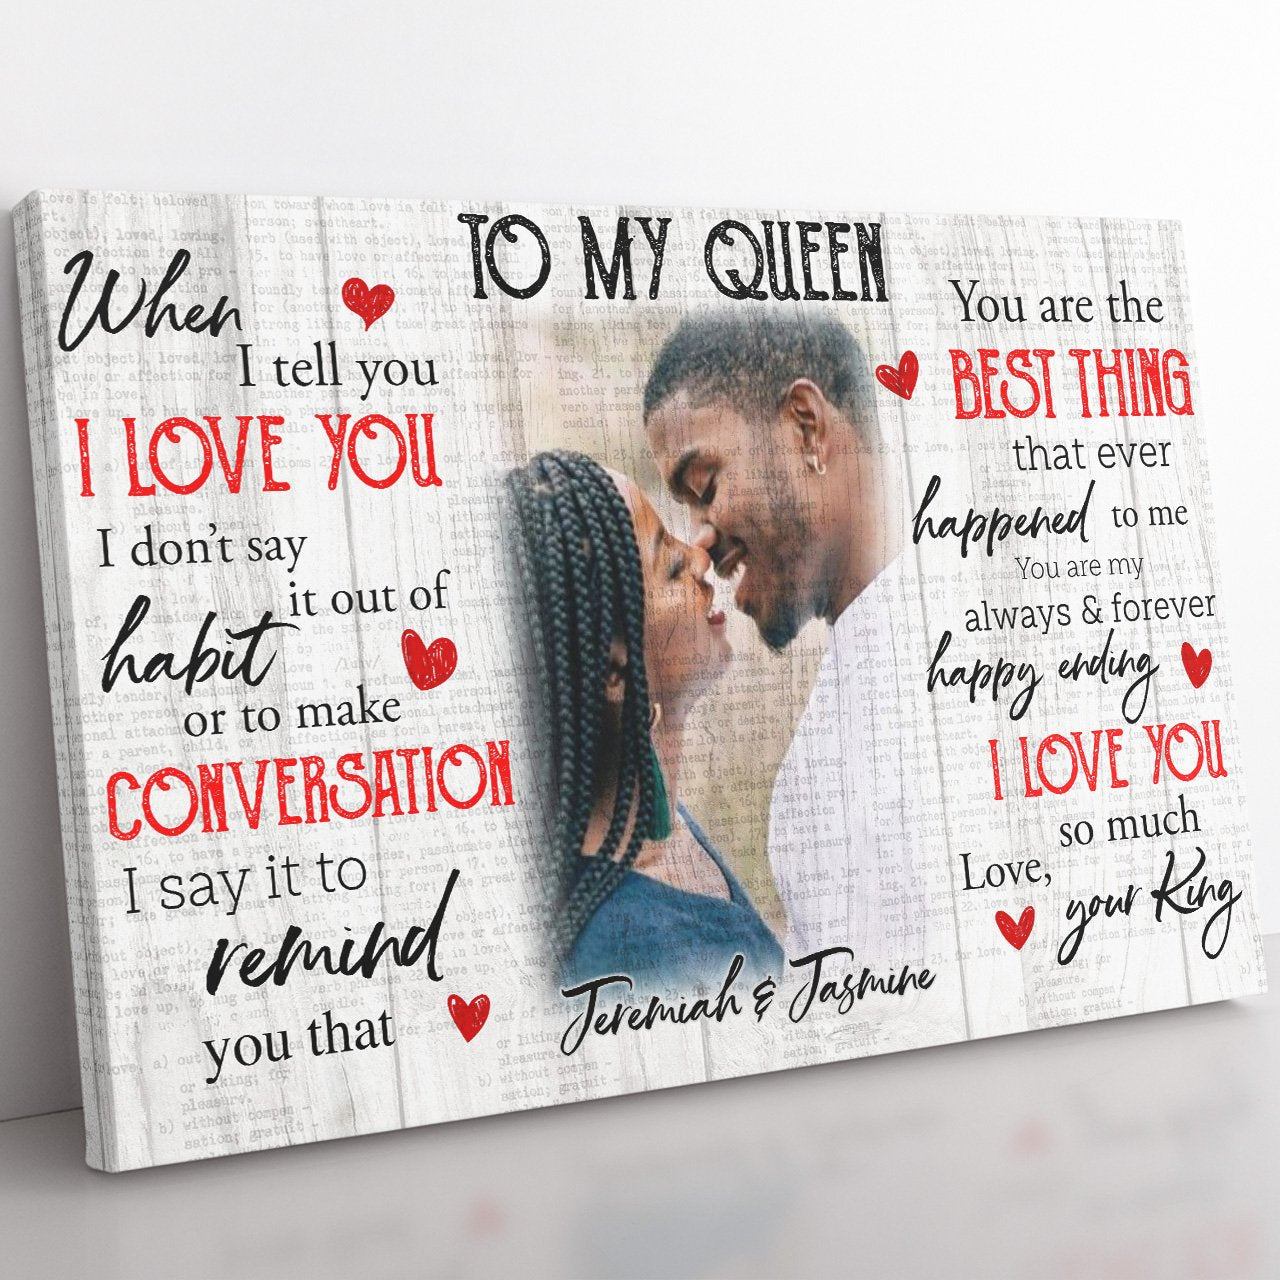 Personalized Photo Canvas for My Queen, When I Tell You I Love You Canvas, You Are the Best Thing Canvas Gift for Wife, Christmas Valentines Gifts